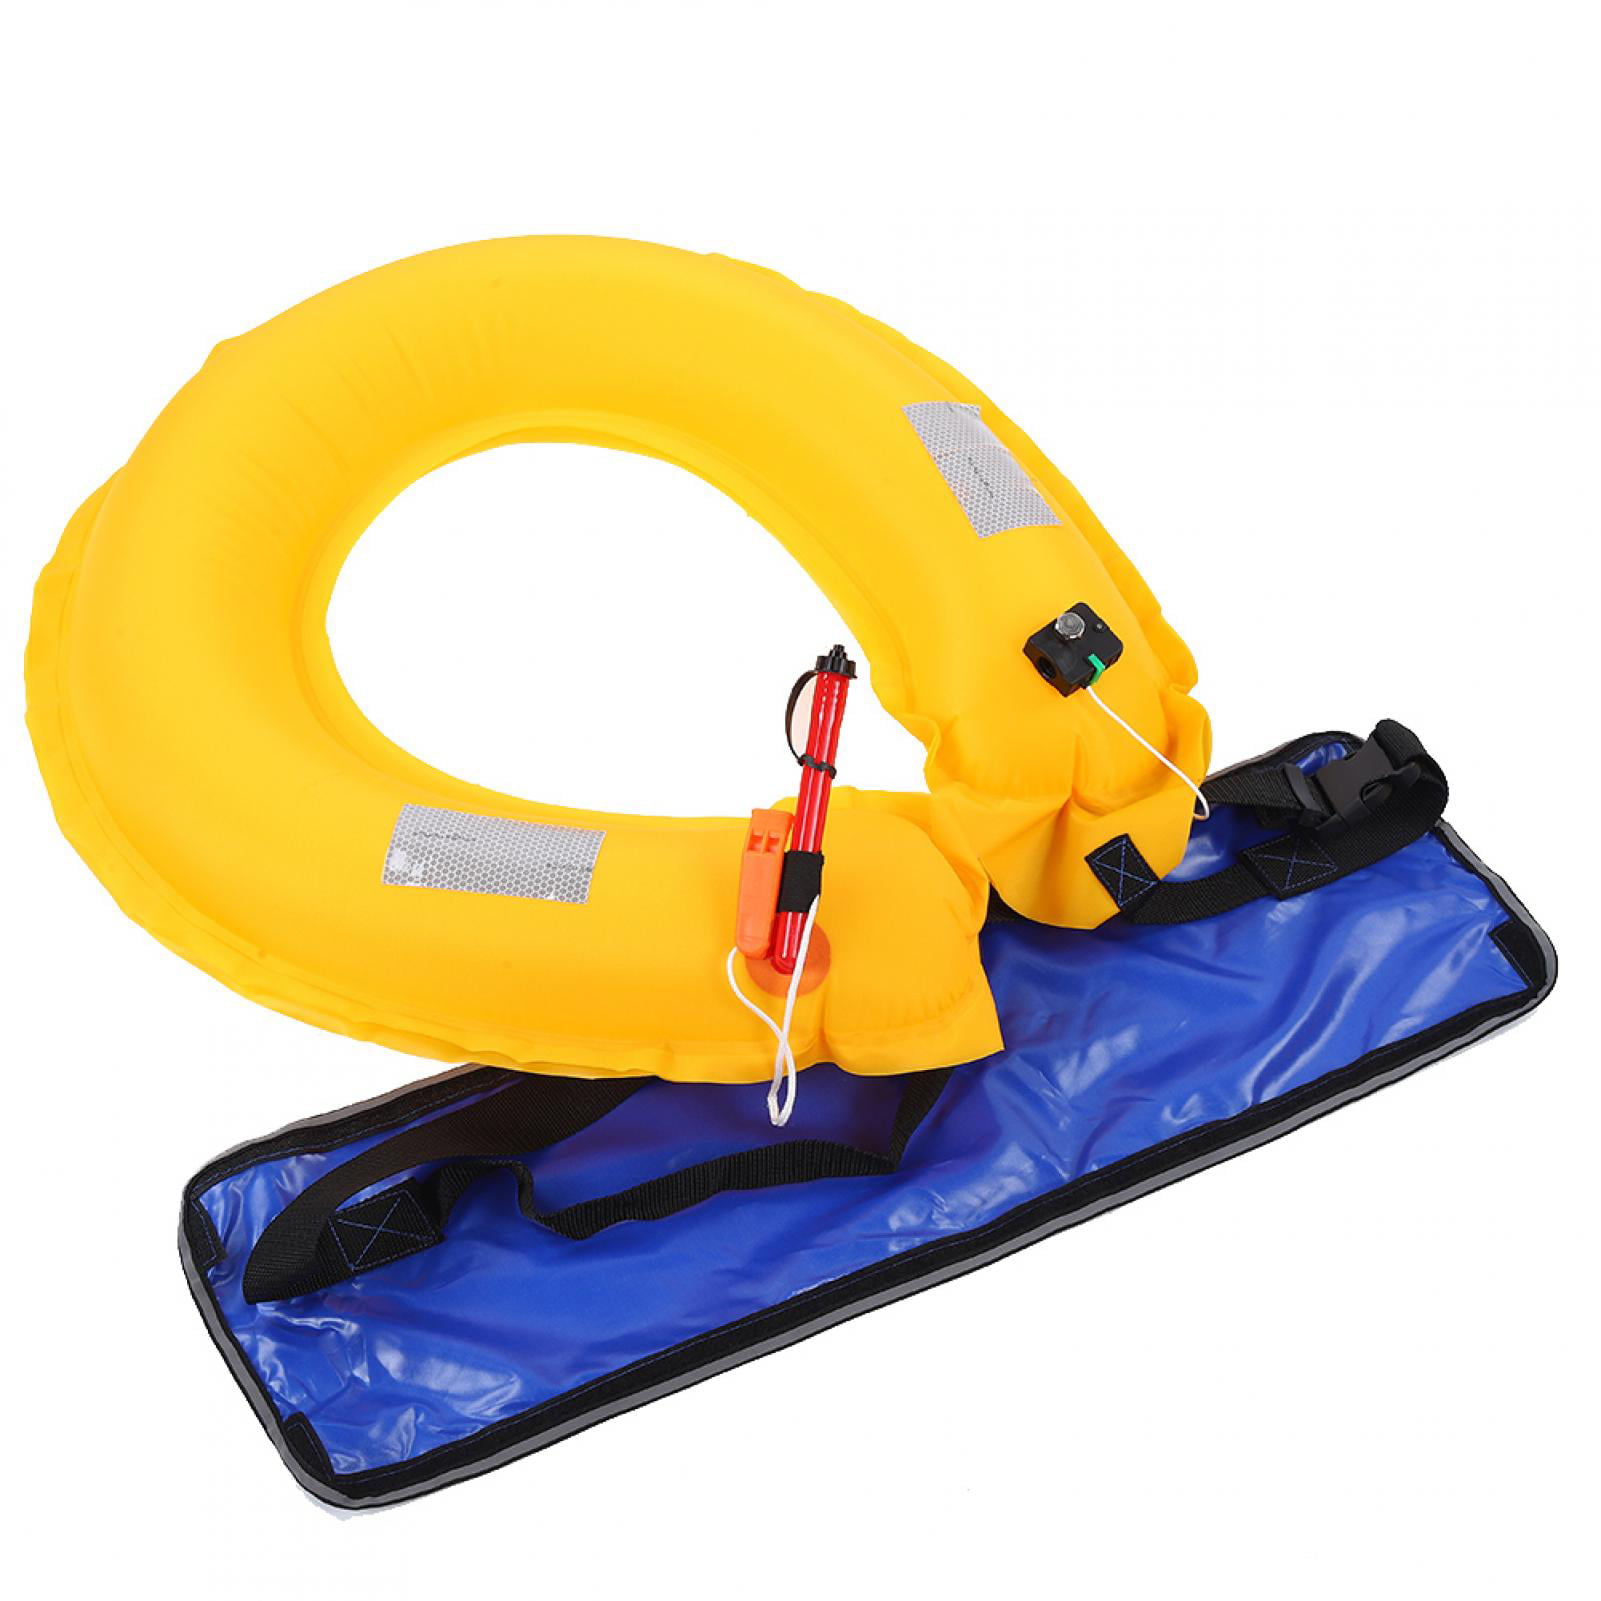 Adjustable Inflatable Life Jacket Belt With Reflective Tapes and Whistle 150N 